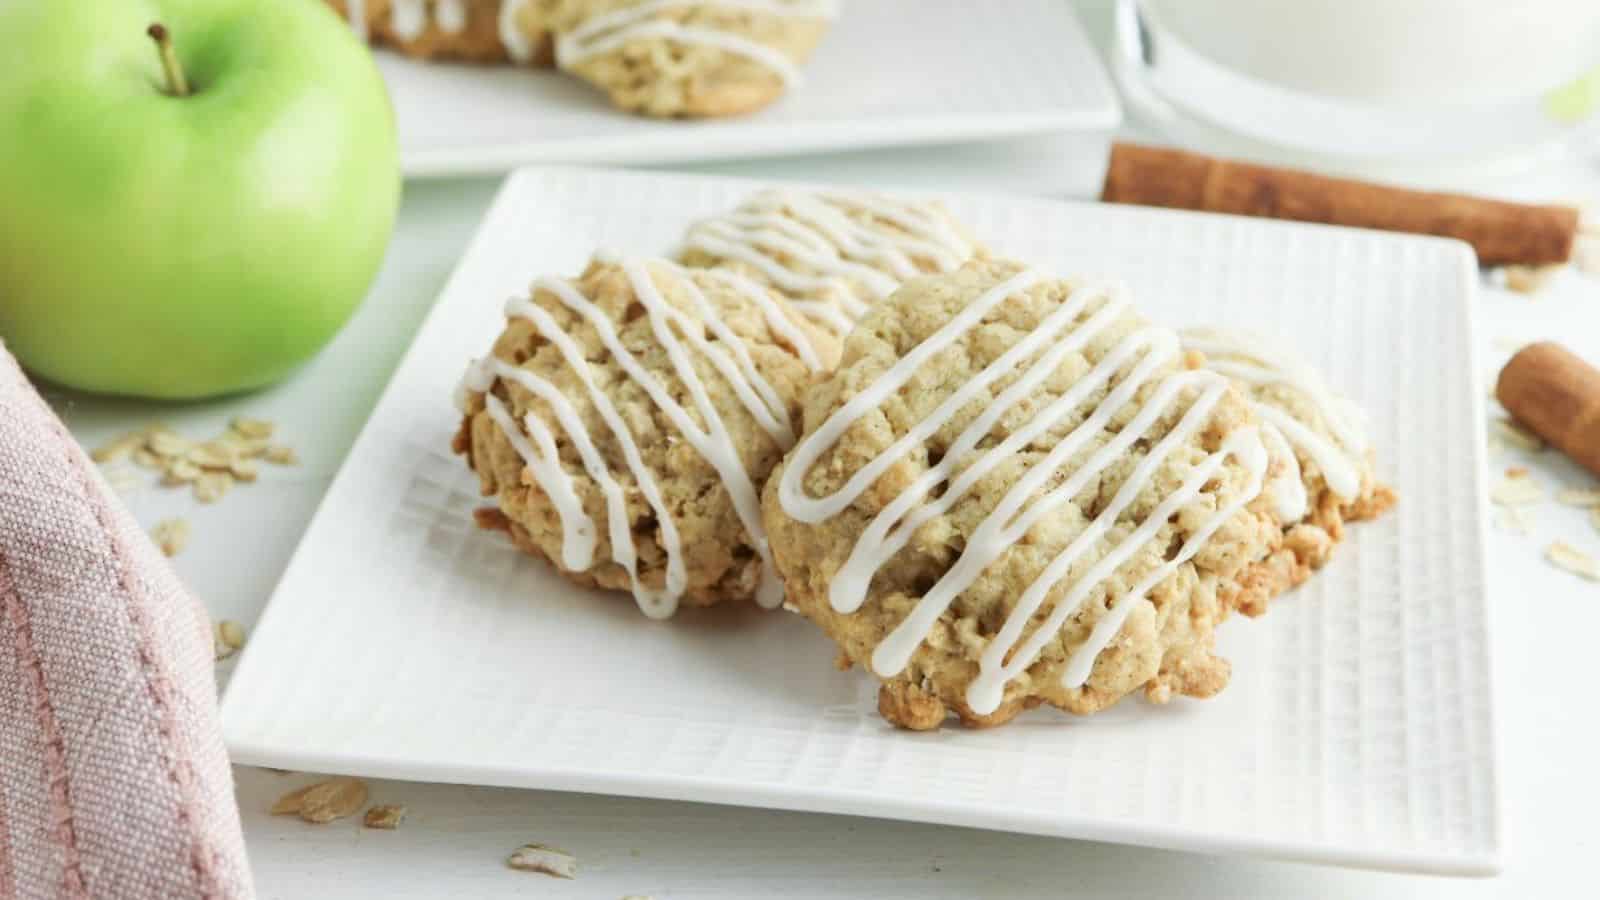 Apple oatmeal cookies with icing and apples on a white plate.